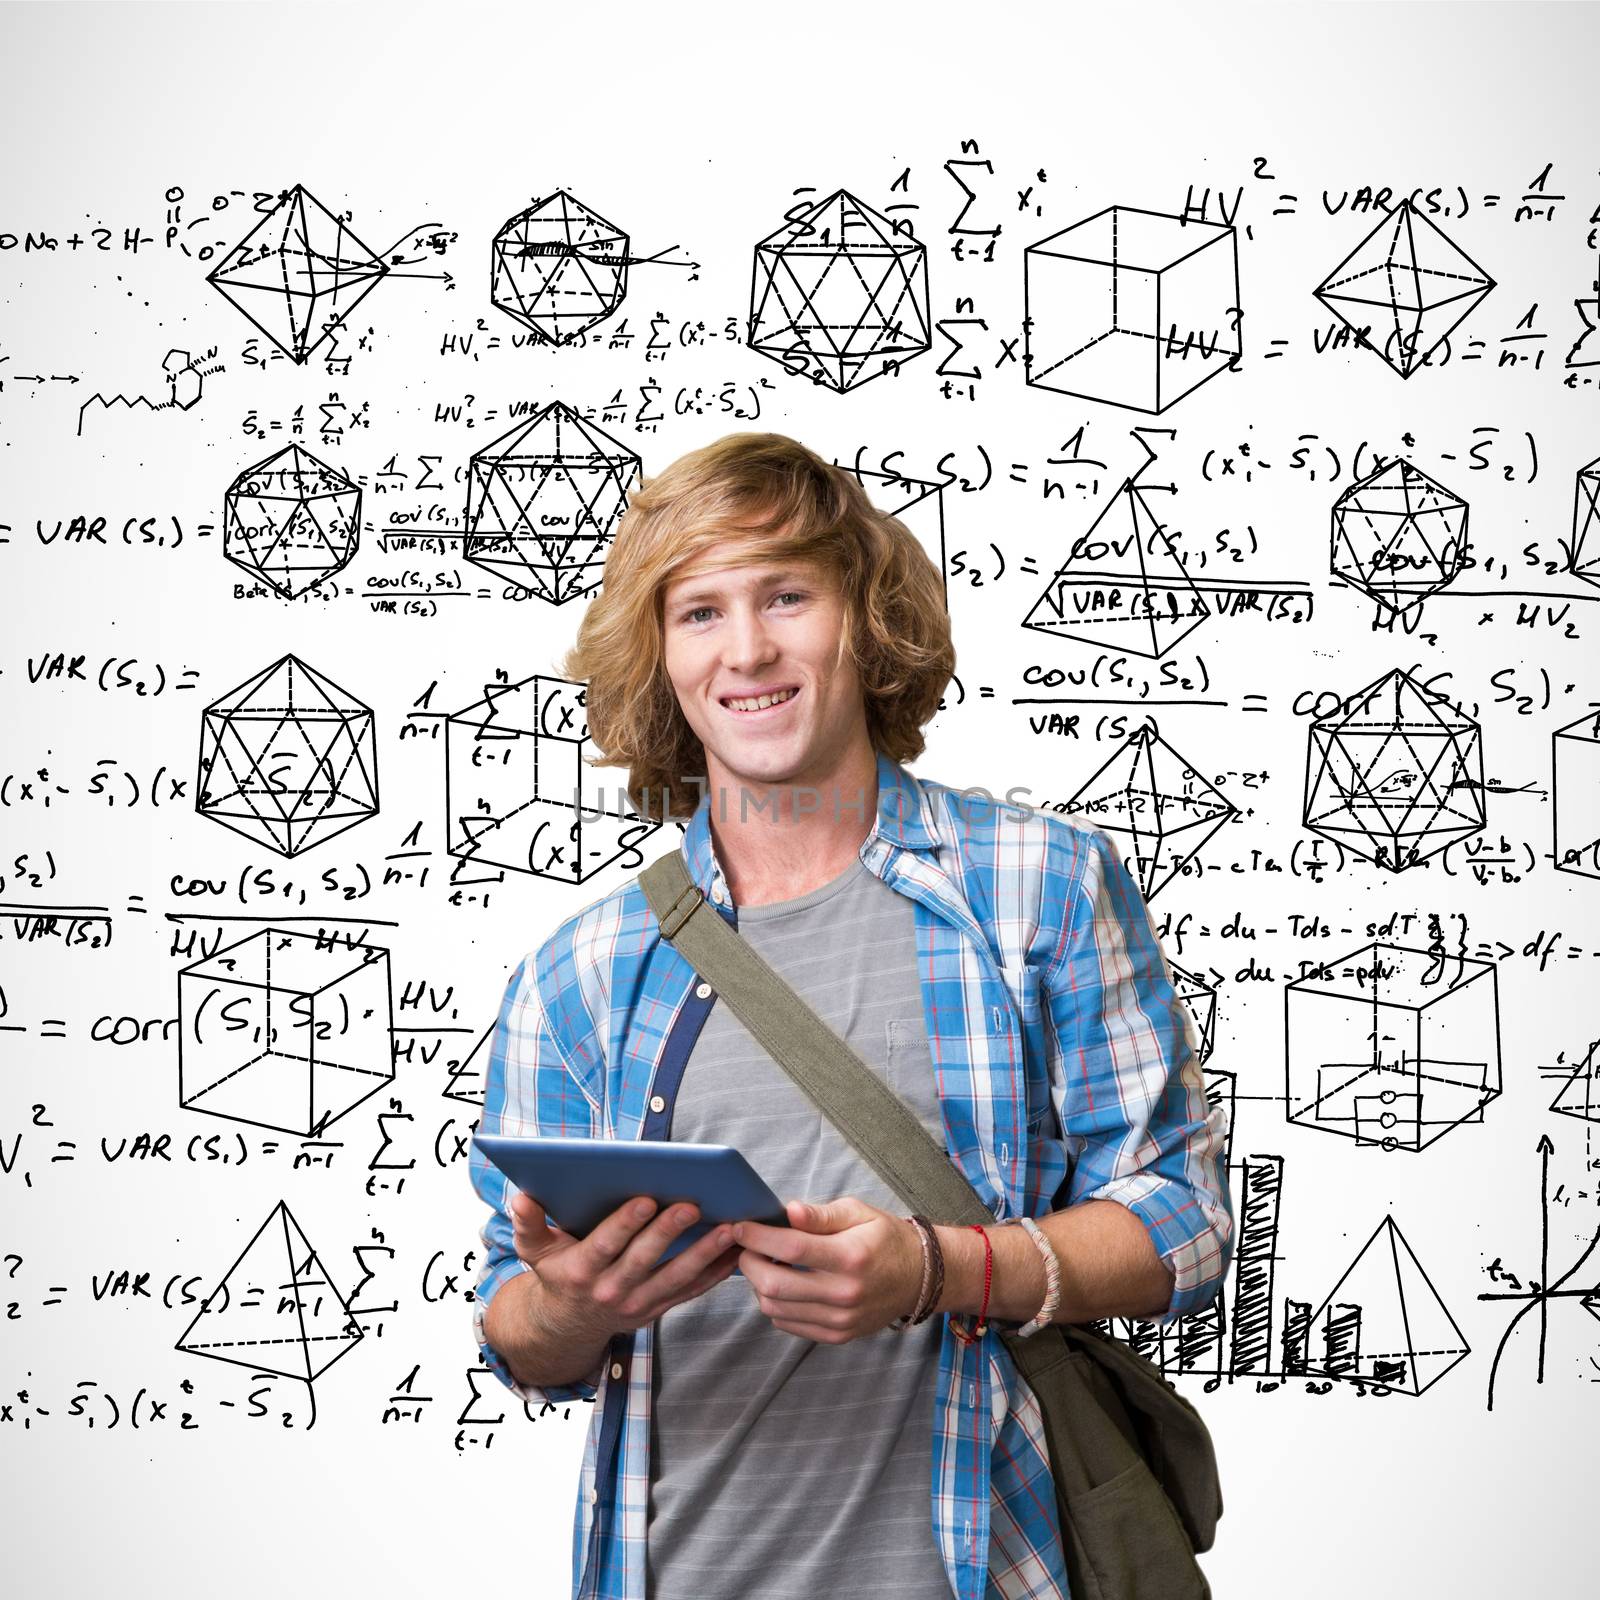 Composite image of student using tablet in library  by Wavebreakmedia